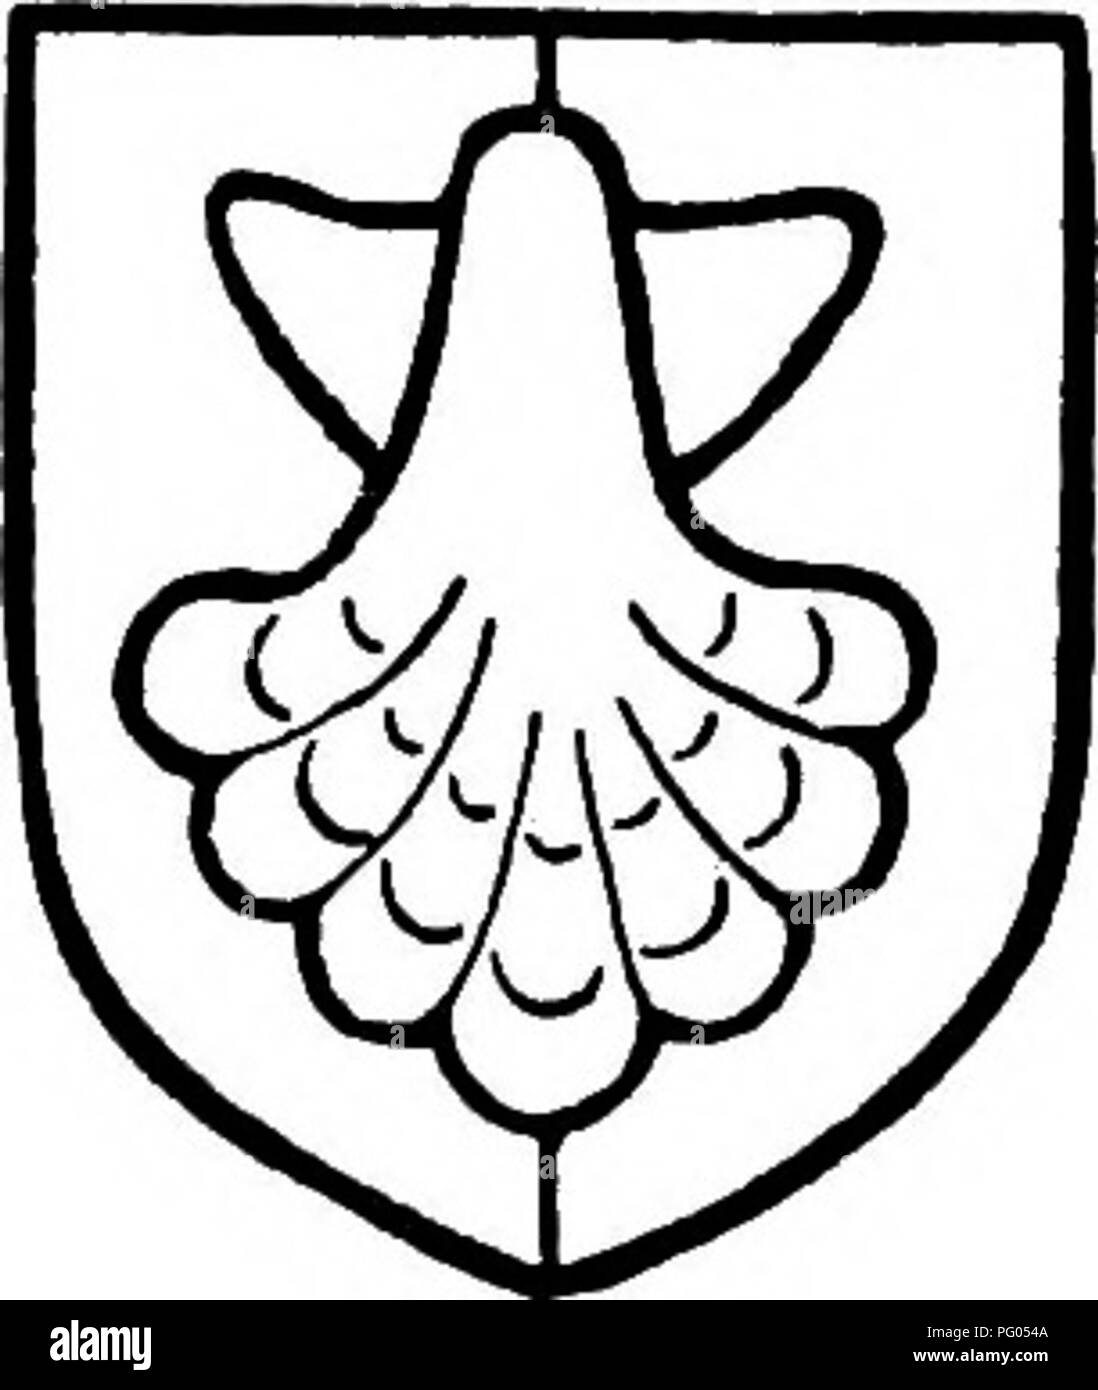 . The Victoria history of the county of Bedford. Natural history. Tanfield. Argent two cheverons sable be- nveen three martlets sable. Winch. Party azure and gules a scallop or. 1530,*' when he was succeeded by his son Francis, whose son Clement died seised in 1587,** and in 1615 William Tanfield his son conveyed the manor 10 Testa de Nevill (Rec. Com.), 247. 11 Feet of F. Beds. Mich. 31 Hen. III. 12 Ibid. 47 Hen. III. 18 Chart. R. 35 Edw. I, No. 100. 14 Chan. Inq. p.m. 15 Edw. II, No. 44. In 1312 the bishop obtained a grant of twelve oaks from the royal forest of Wan- berge for ' repairing hi Stock Photo